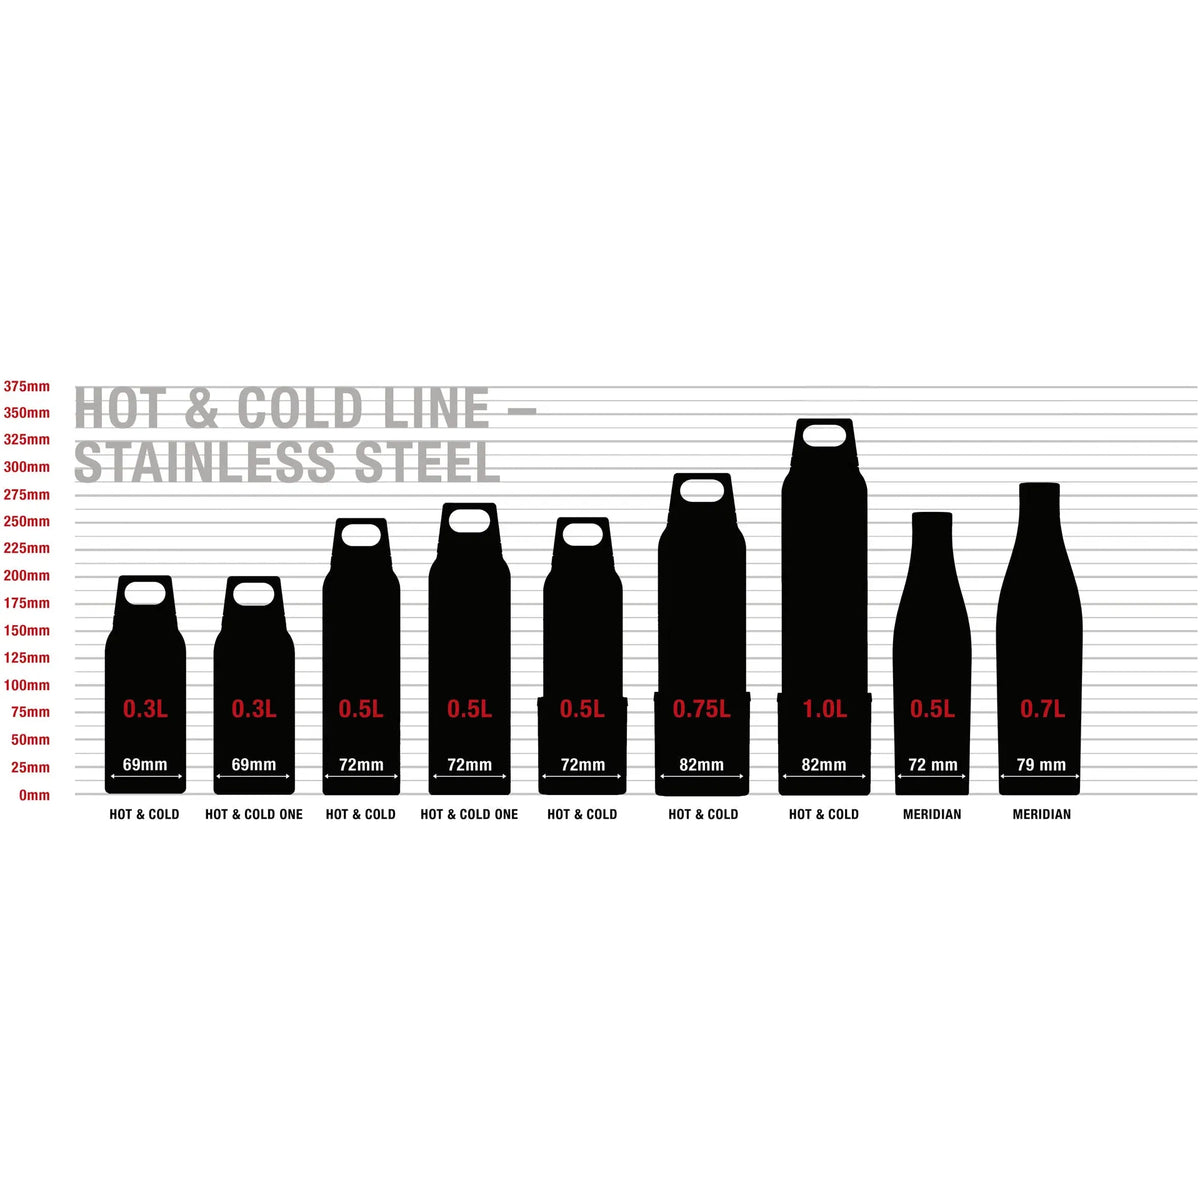 Sigg Meridian 0.7L Insulated Water Bottle - Black